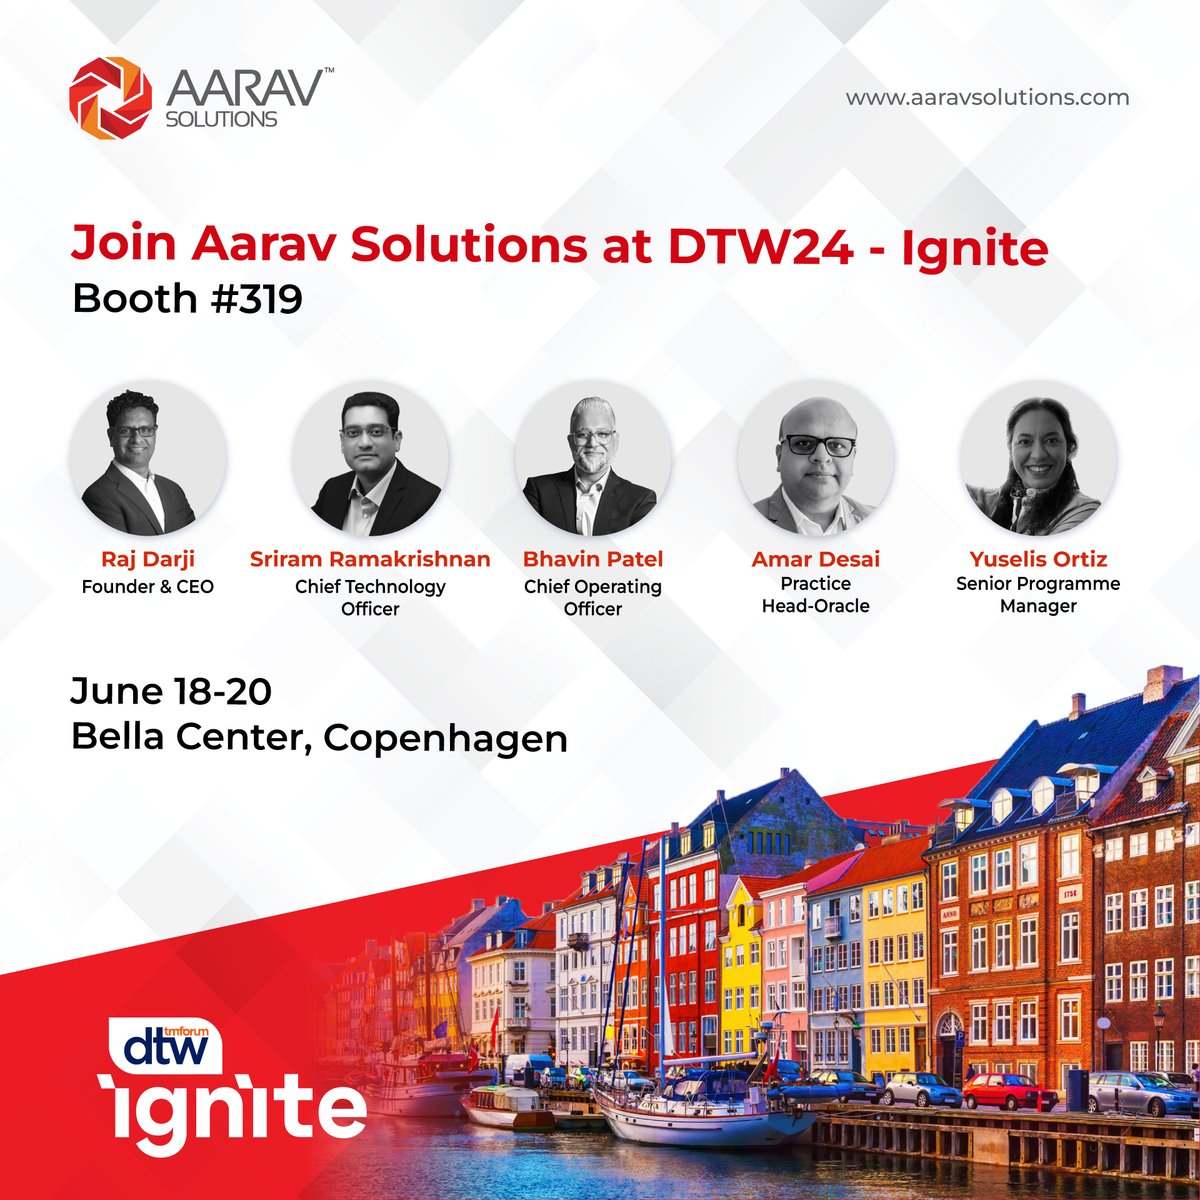 Join Aarav Solutions at DTW24 #Ignite this June to explore our #GenAI Accelerators. 

To schedule a meeting with us, visit mailchi.mp/aaravsolutions… or contact us at cocreate@aaravsolutions.com to explore our demos firsthand.